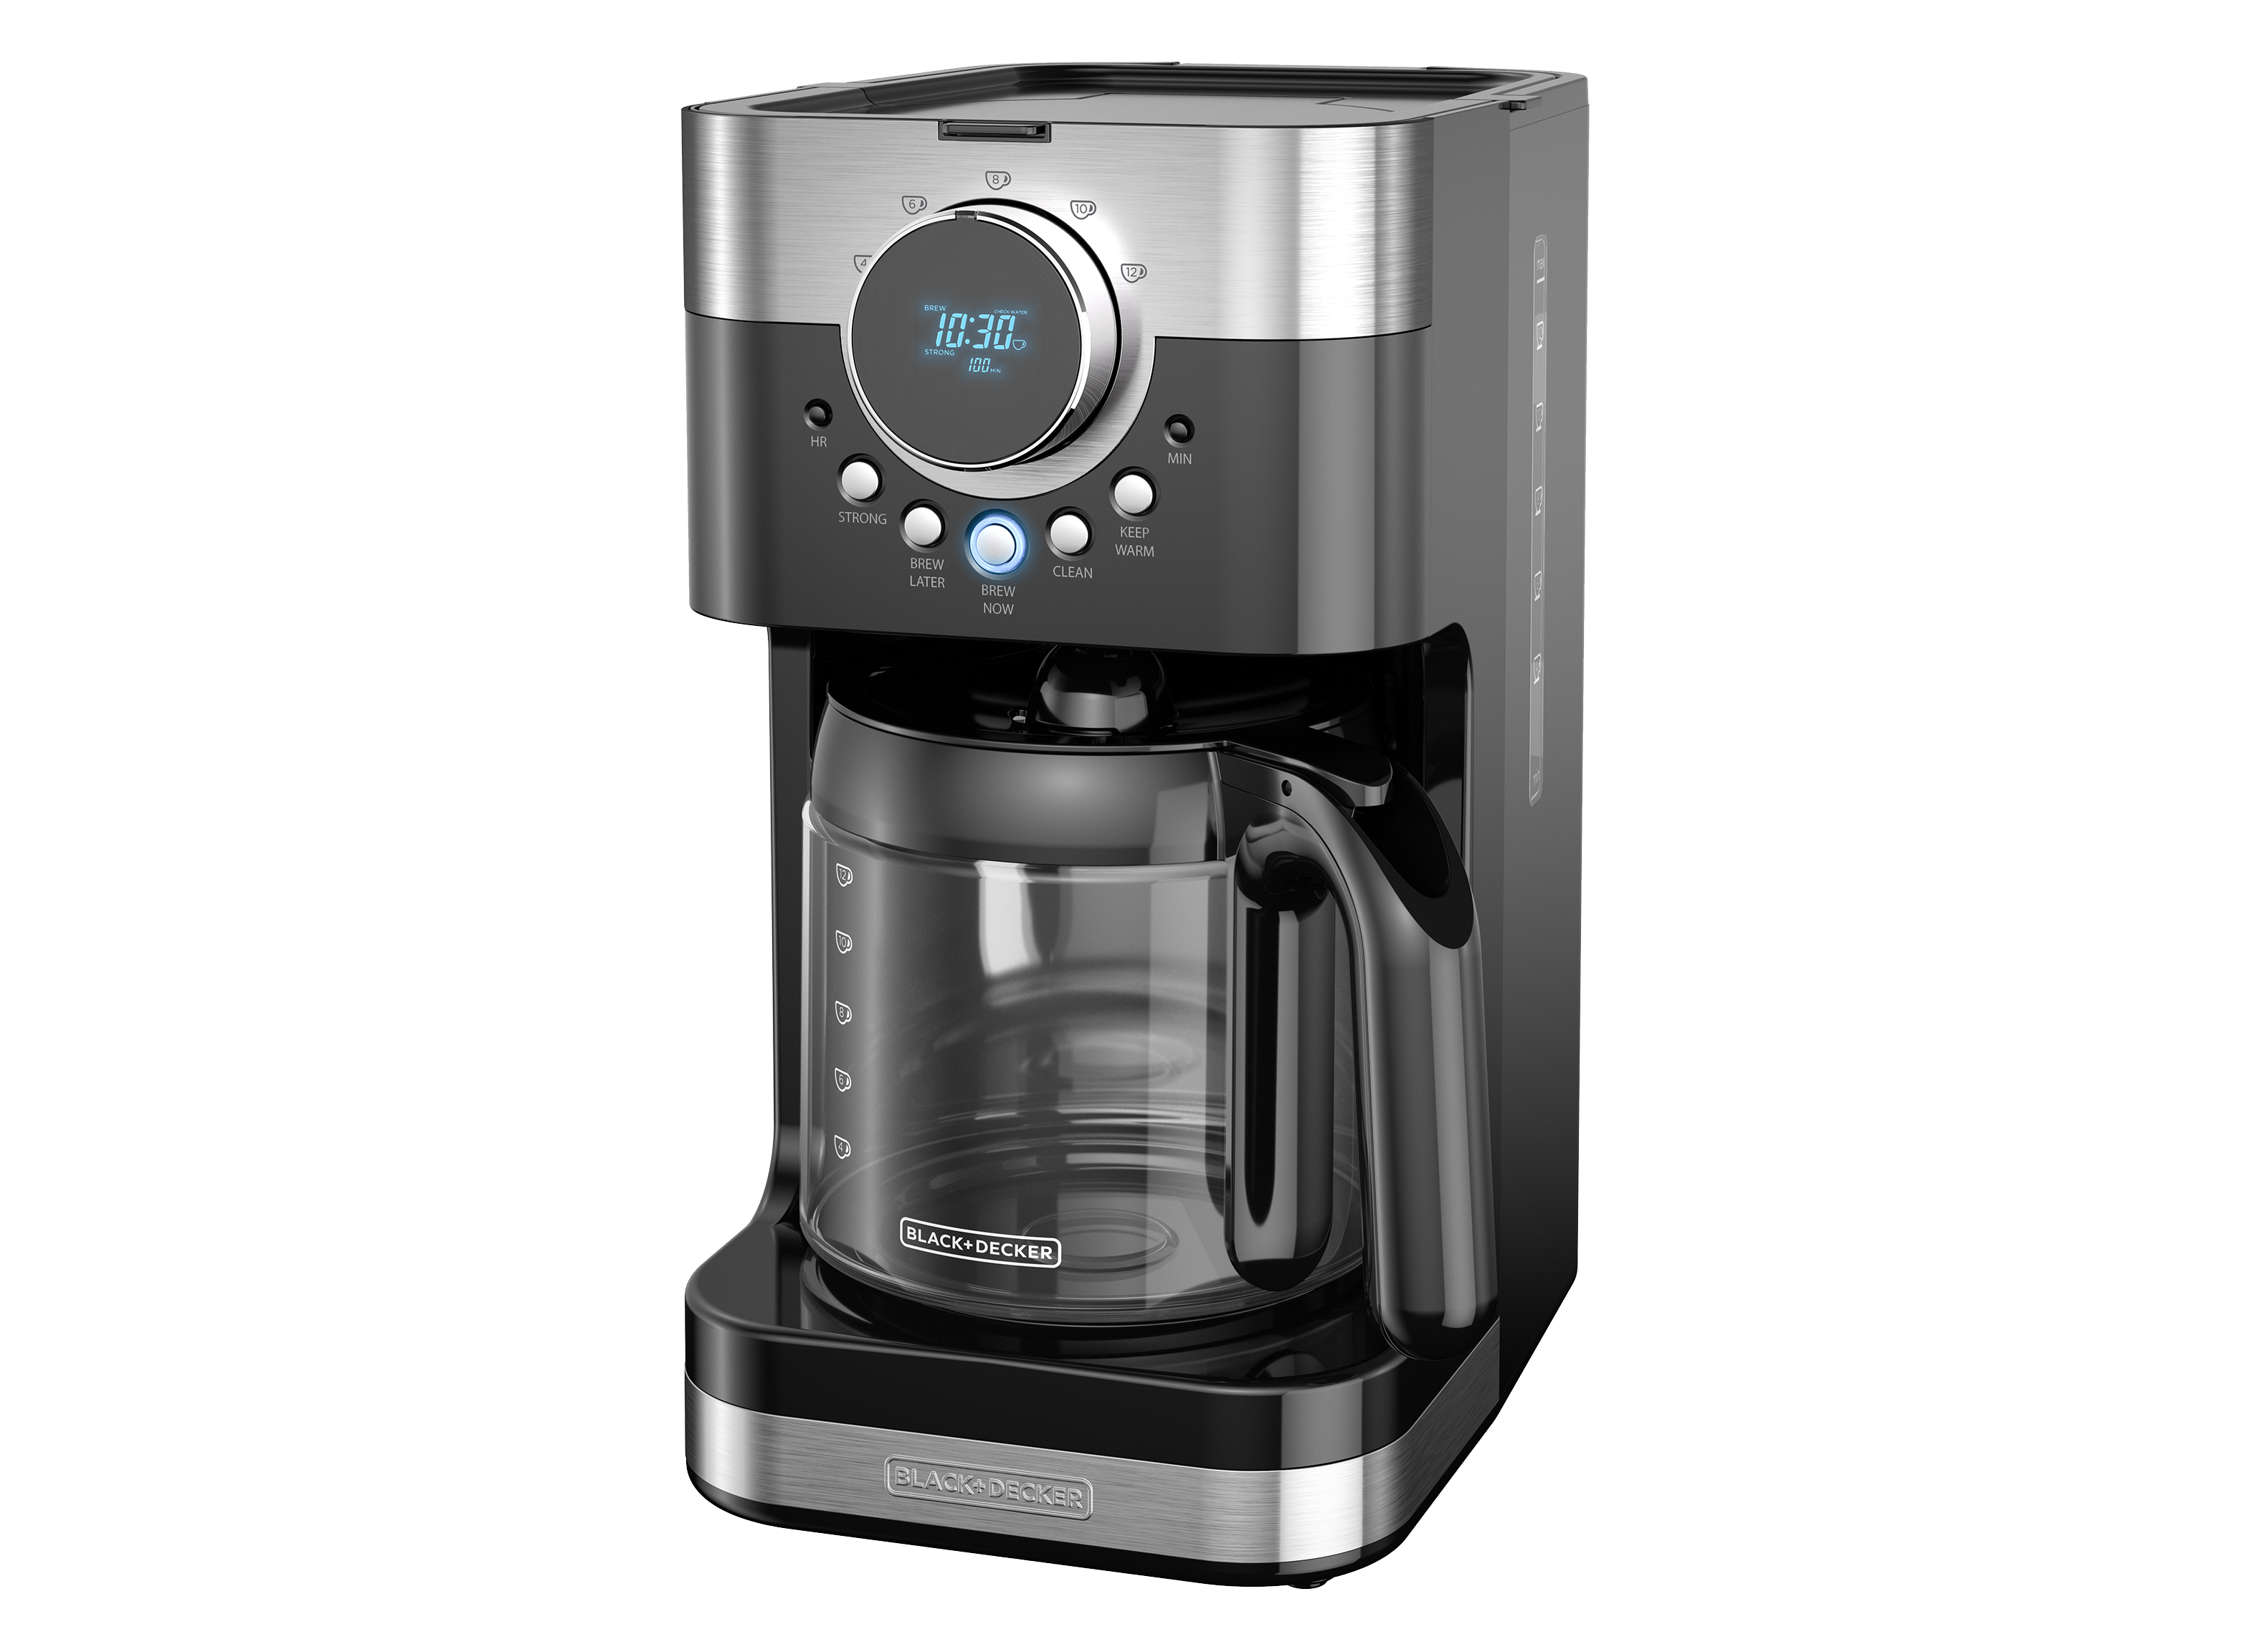 https://crdms.images.consumerreports.org/prod/products/cr/models/395404-drip-coffee-makers-with-carafe-black-decker-select-a-size-easy-dial-programmable-stainless-steel-black-cm4200s-61353.png